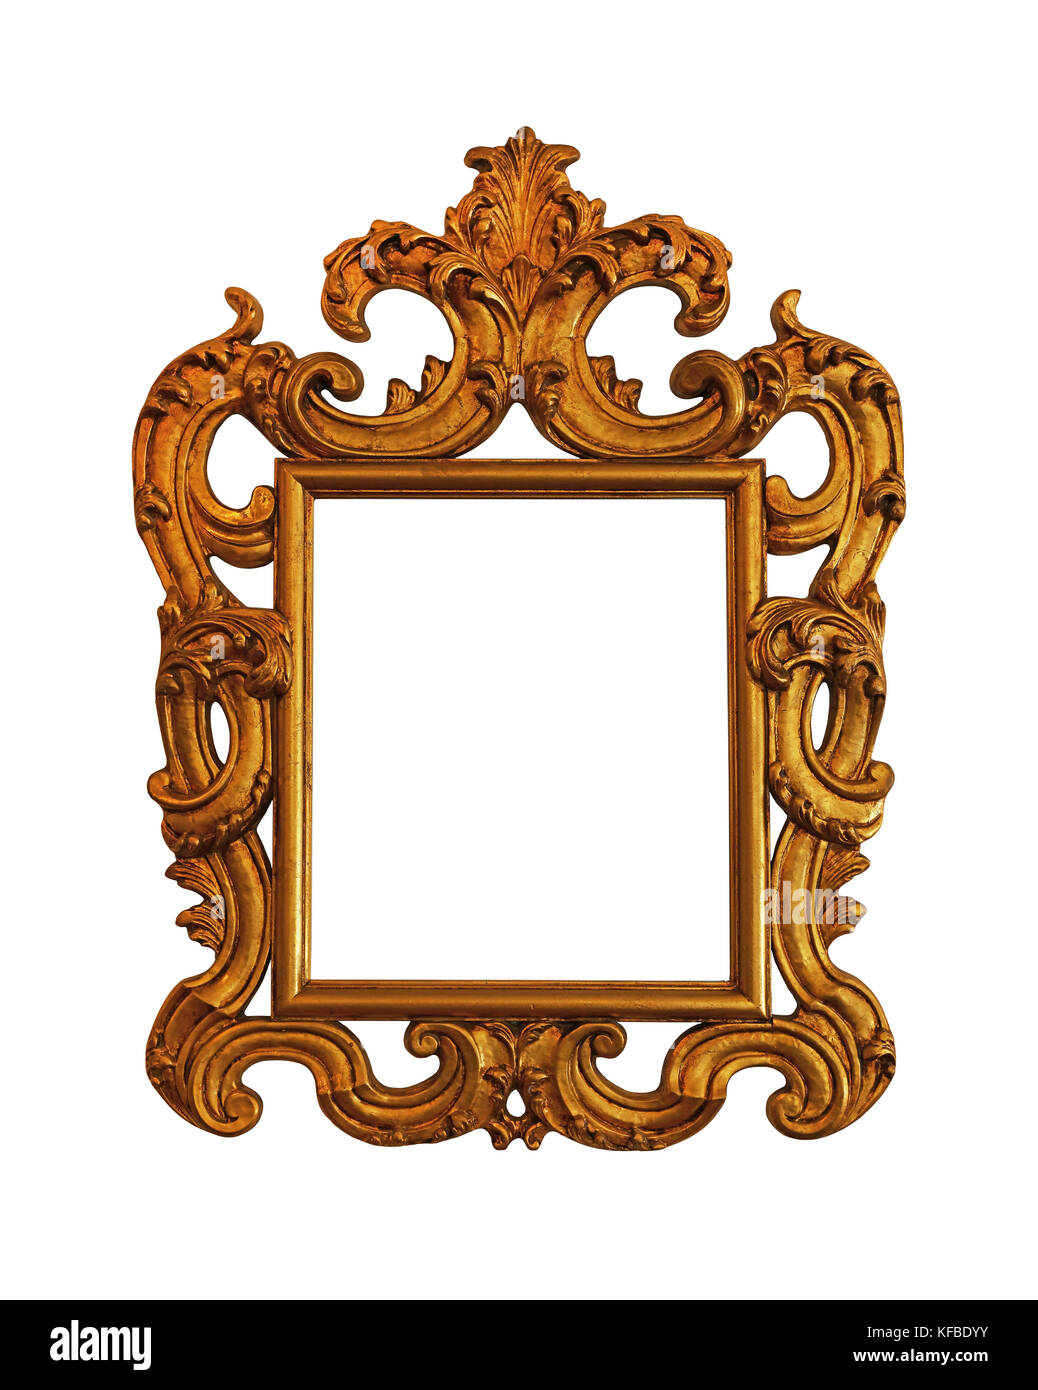 Antique old baroque ornate wooden classic golden painted rectangular frame for picture, photo or mirror, isolated on white background, close up Stock Photo